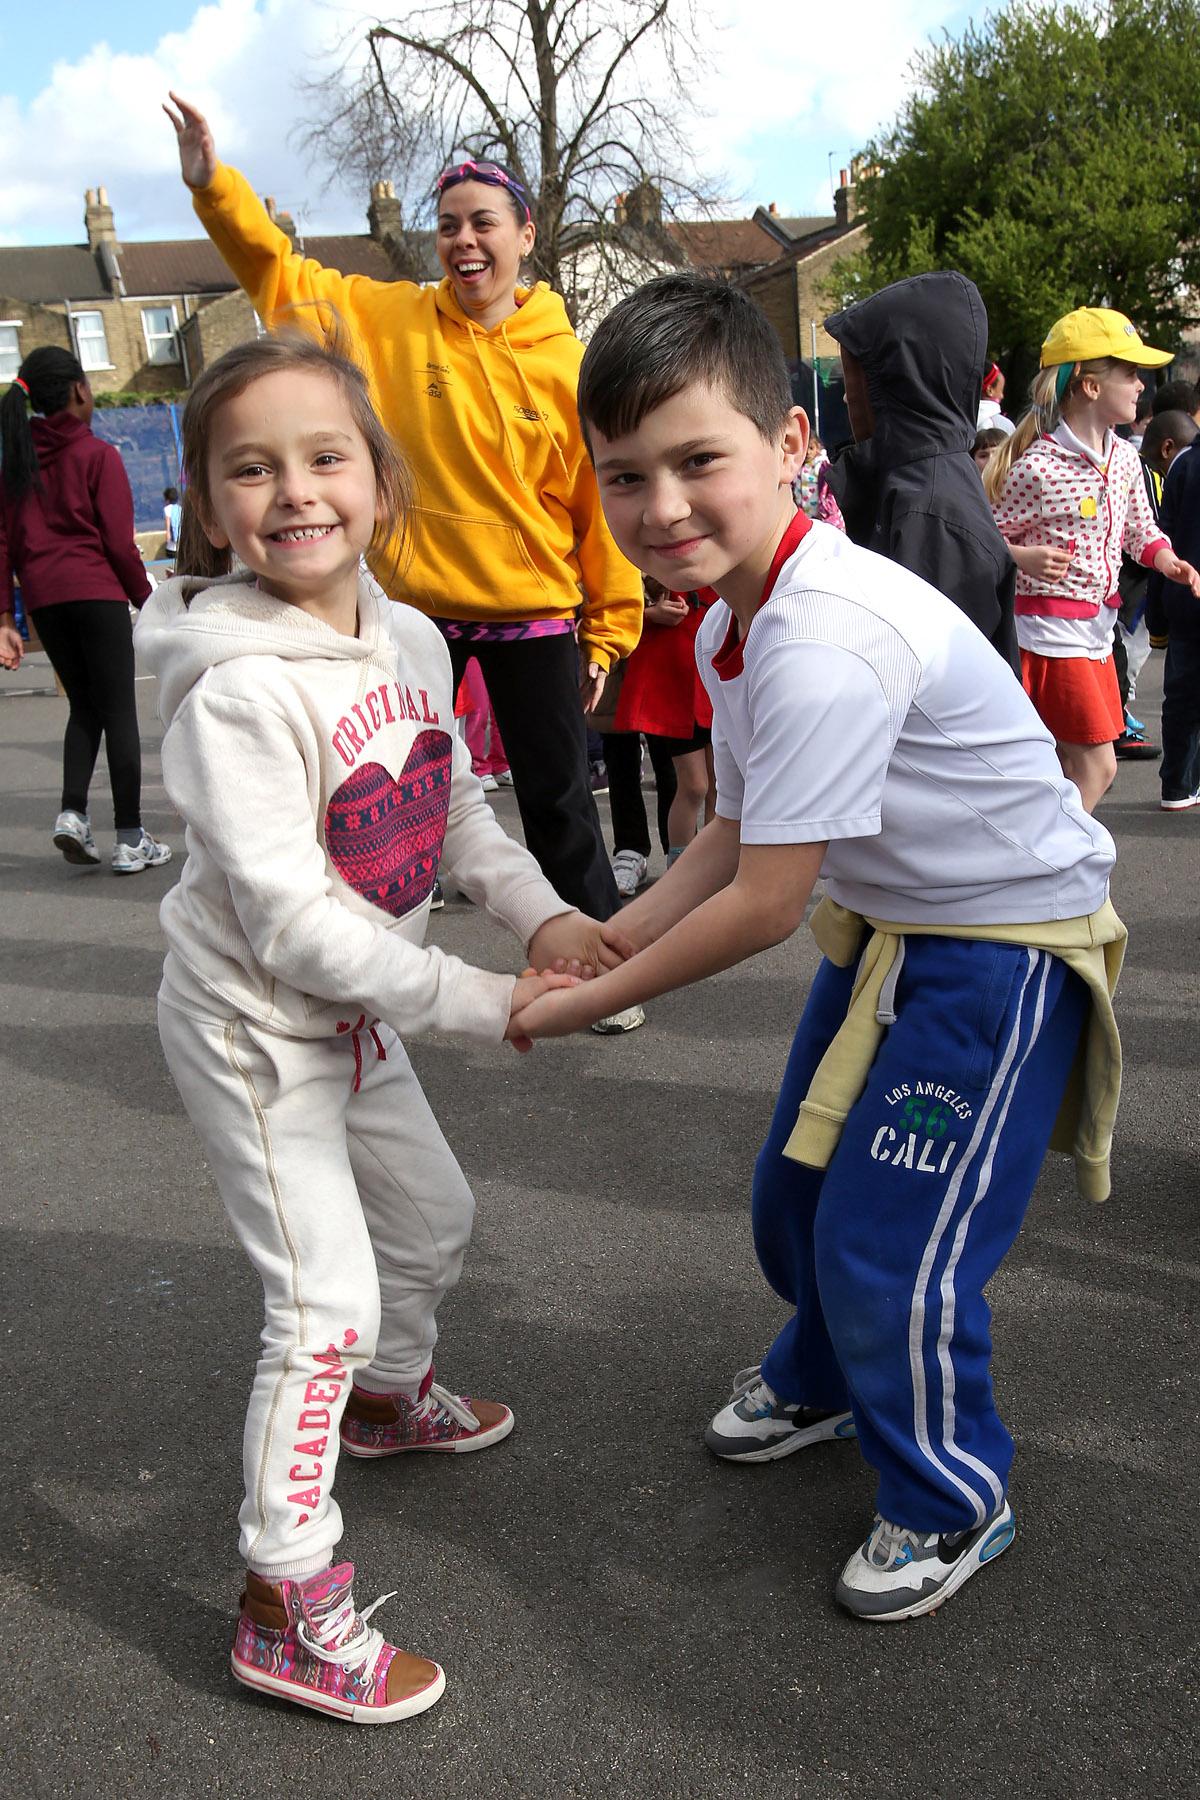 Children take part in a school dance-off for sports relief at St Mary's C of E Primary School, Brooke Road, Walthamstow. (21/3/2014) EL75987_5